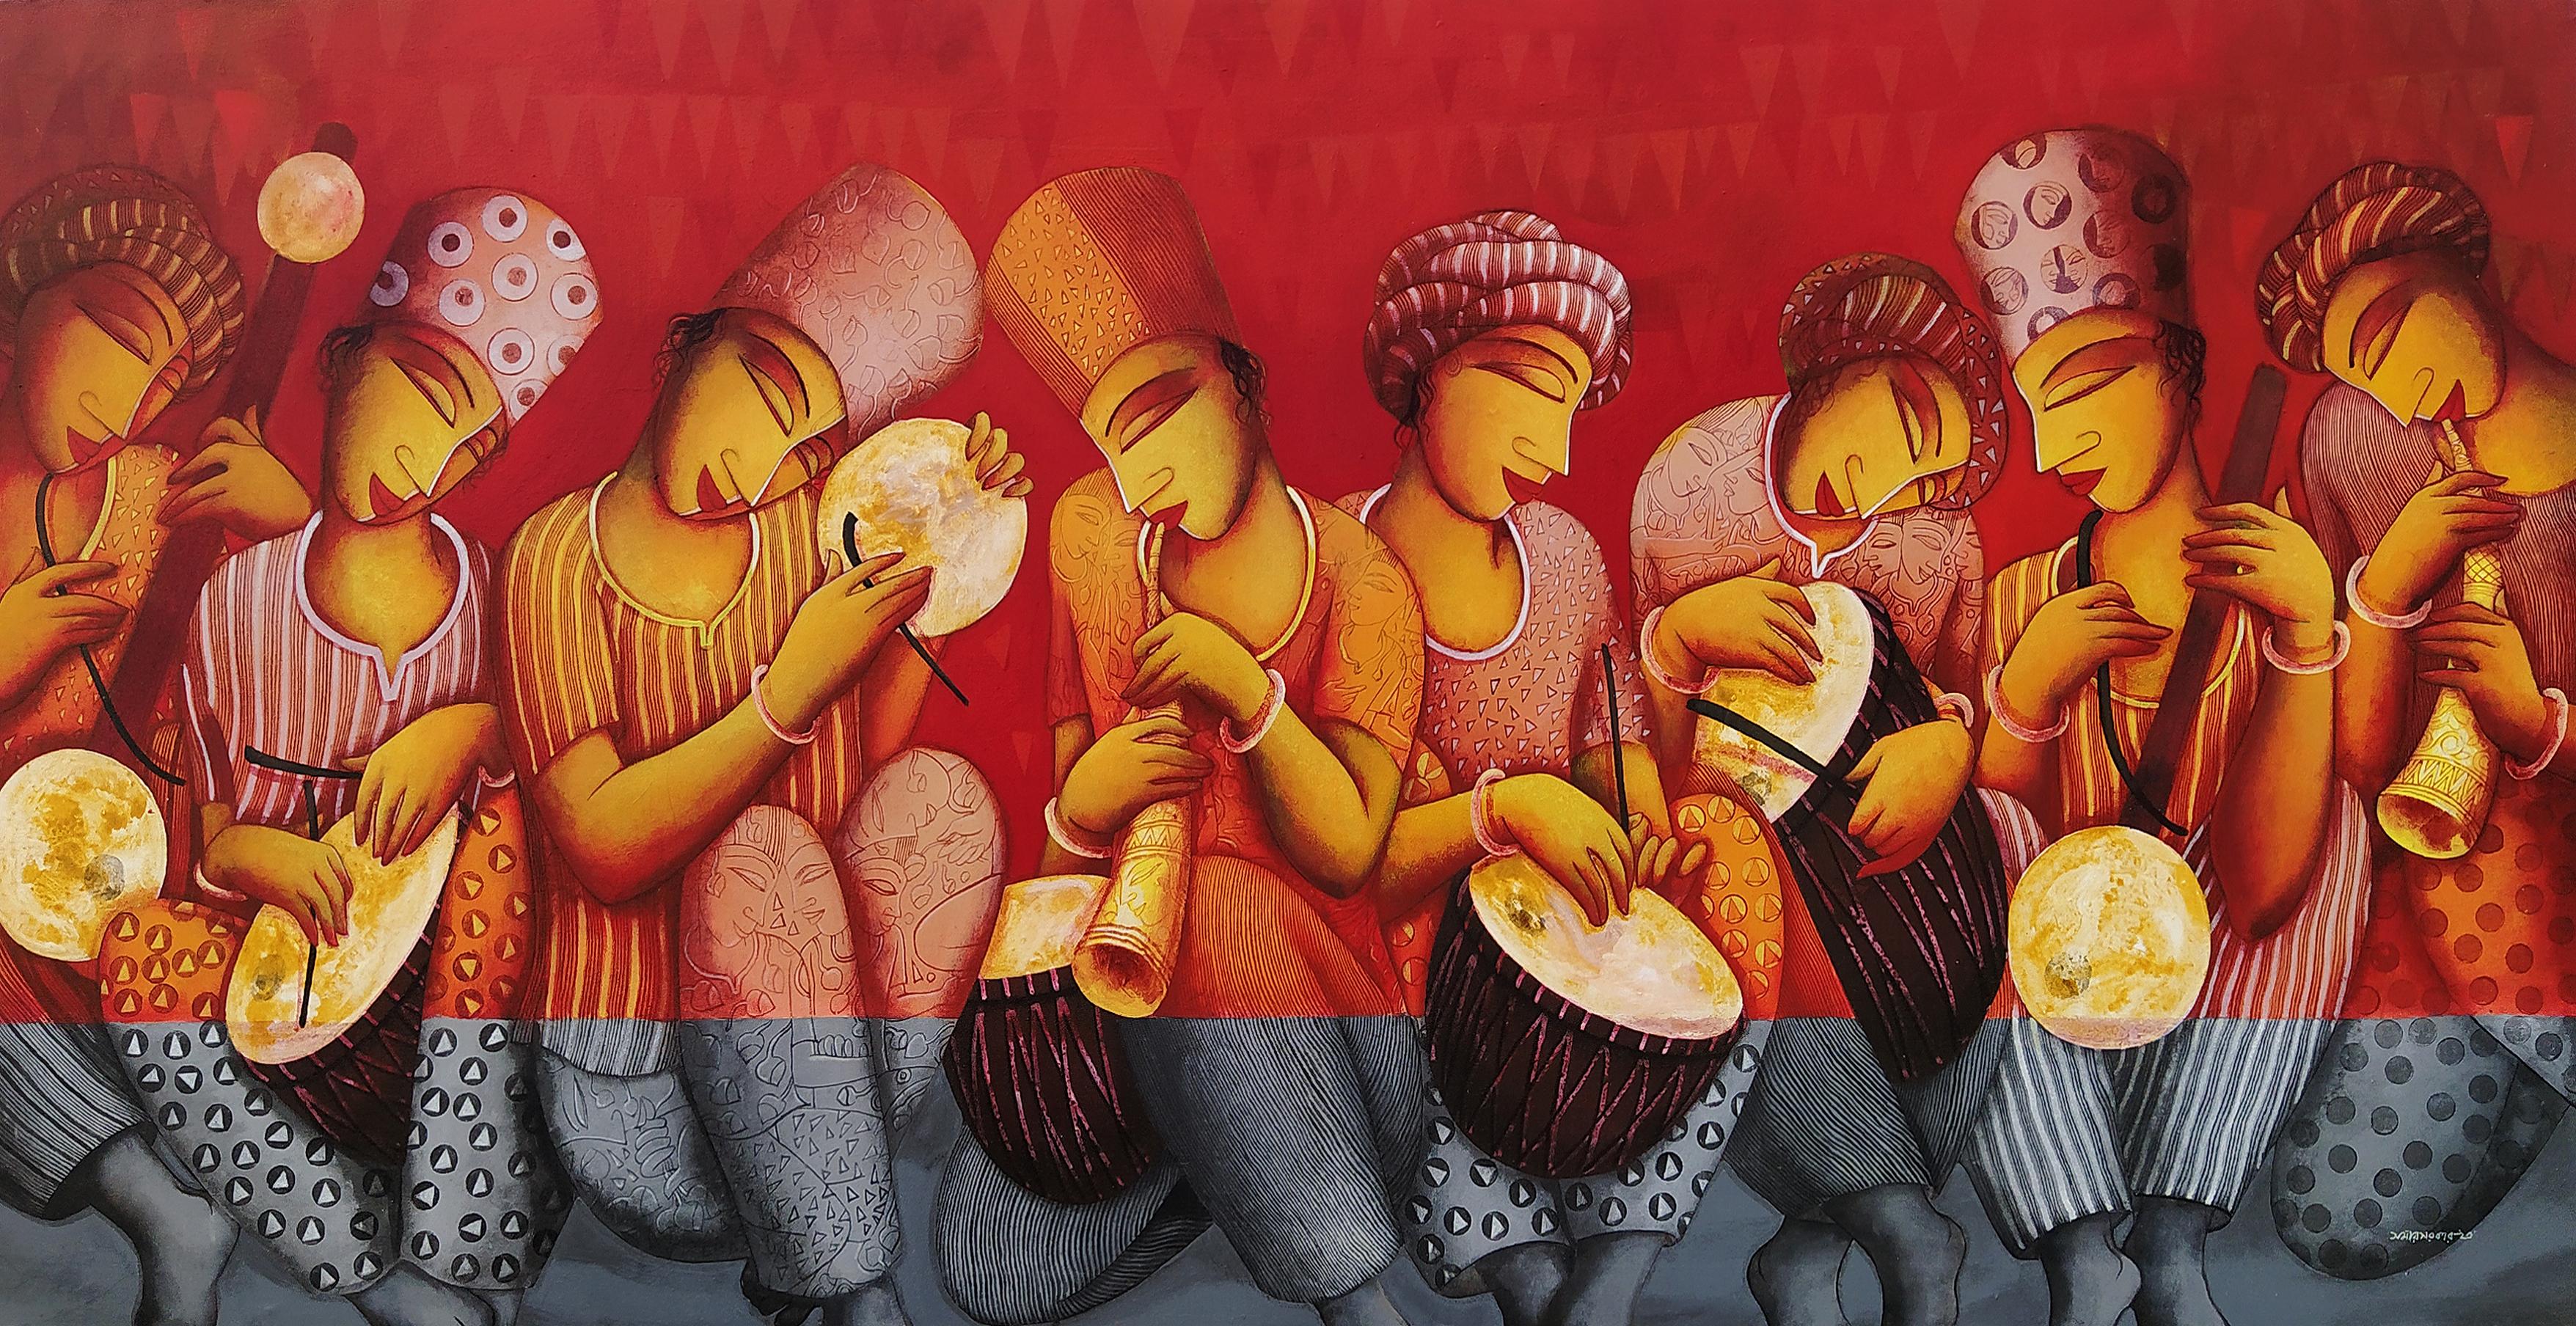 Samir Sarkar Interior Painting - Musicians, Playing Drums, Acrylic on Canvas, Red, Yellow, Indian Artist"In Stock"